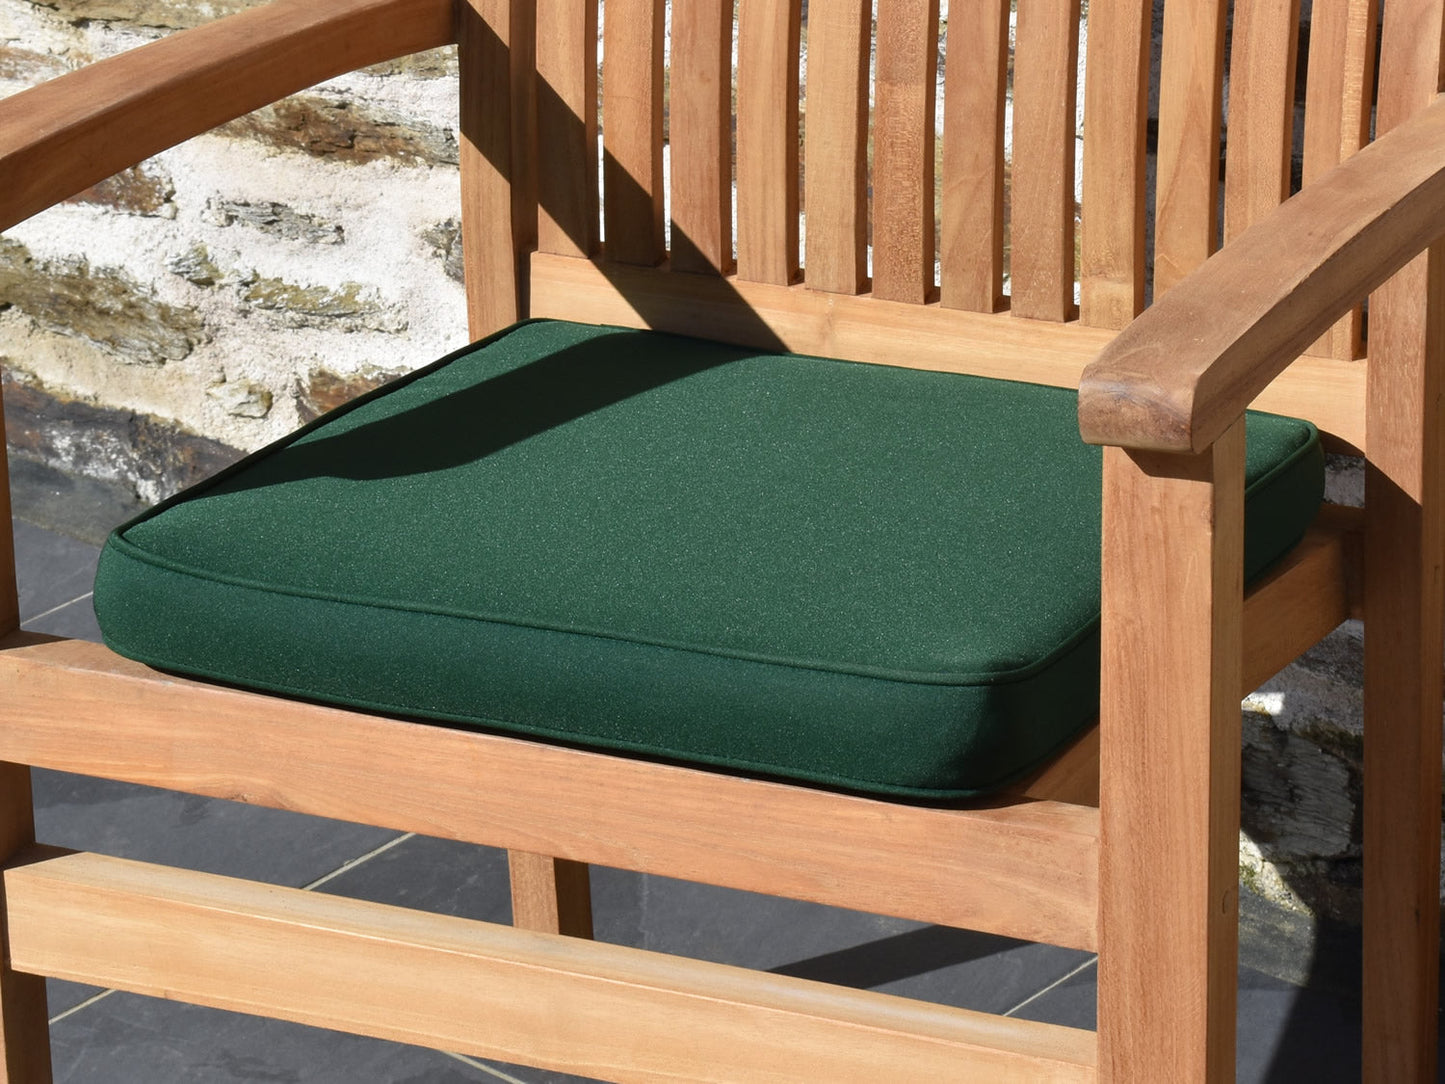 Large outdoor garden seat pad Green, close view